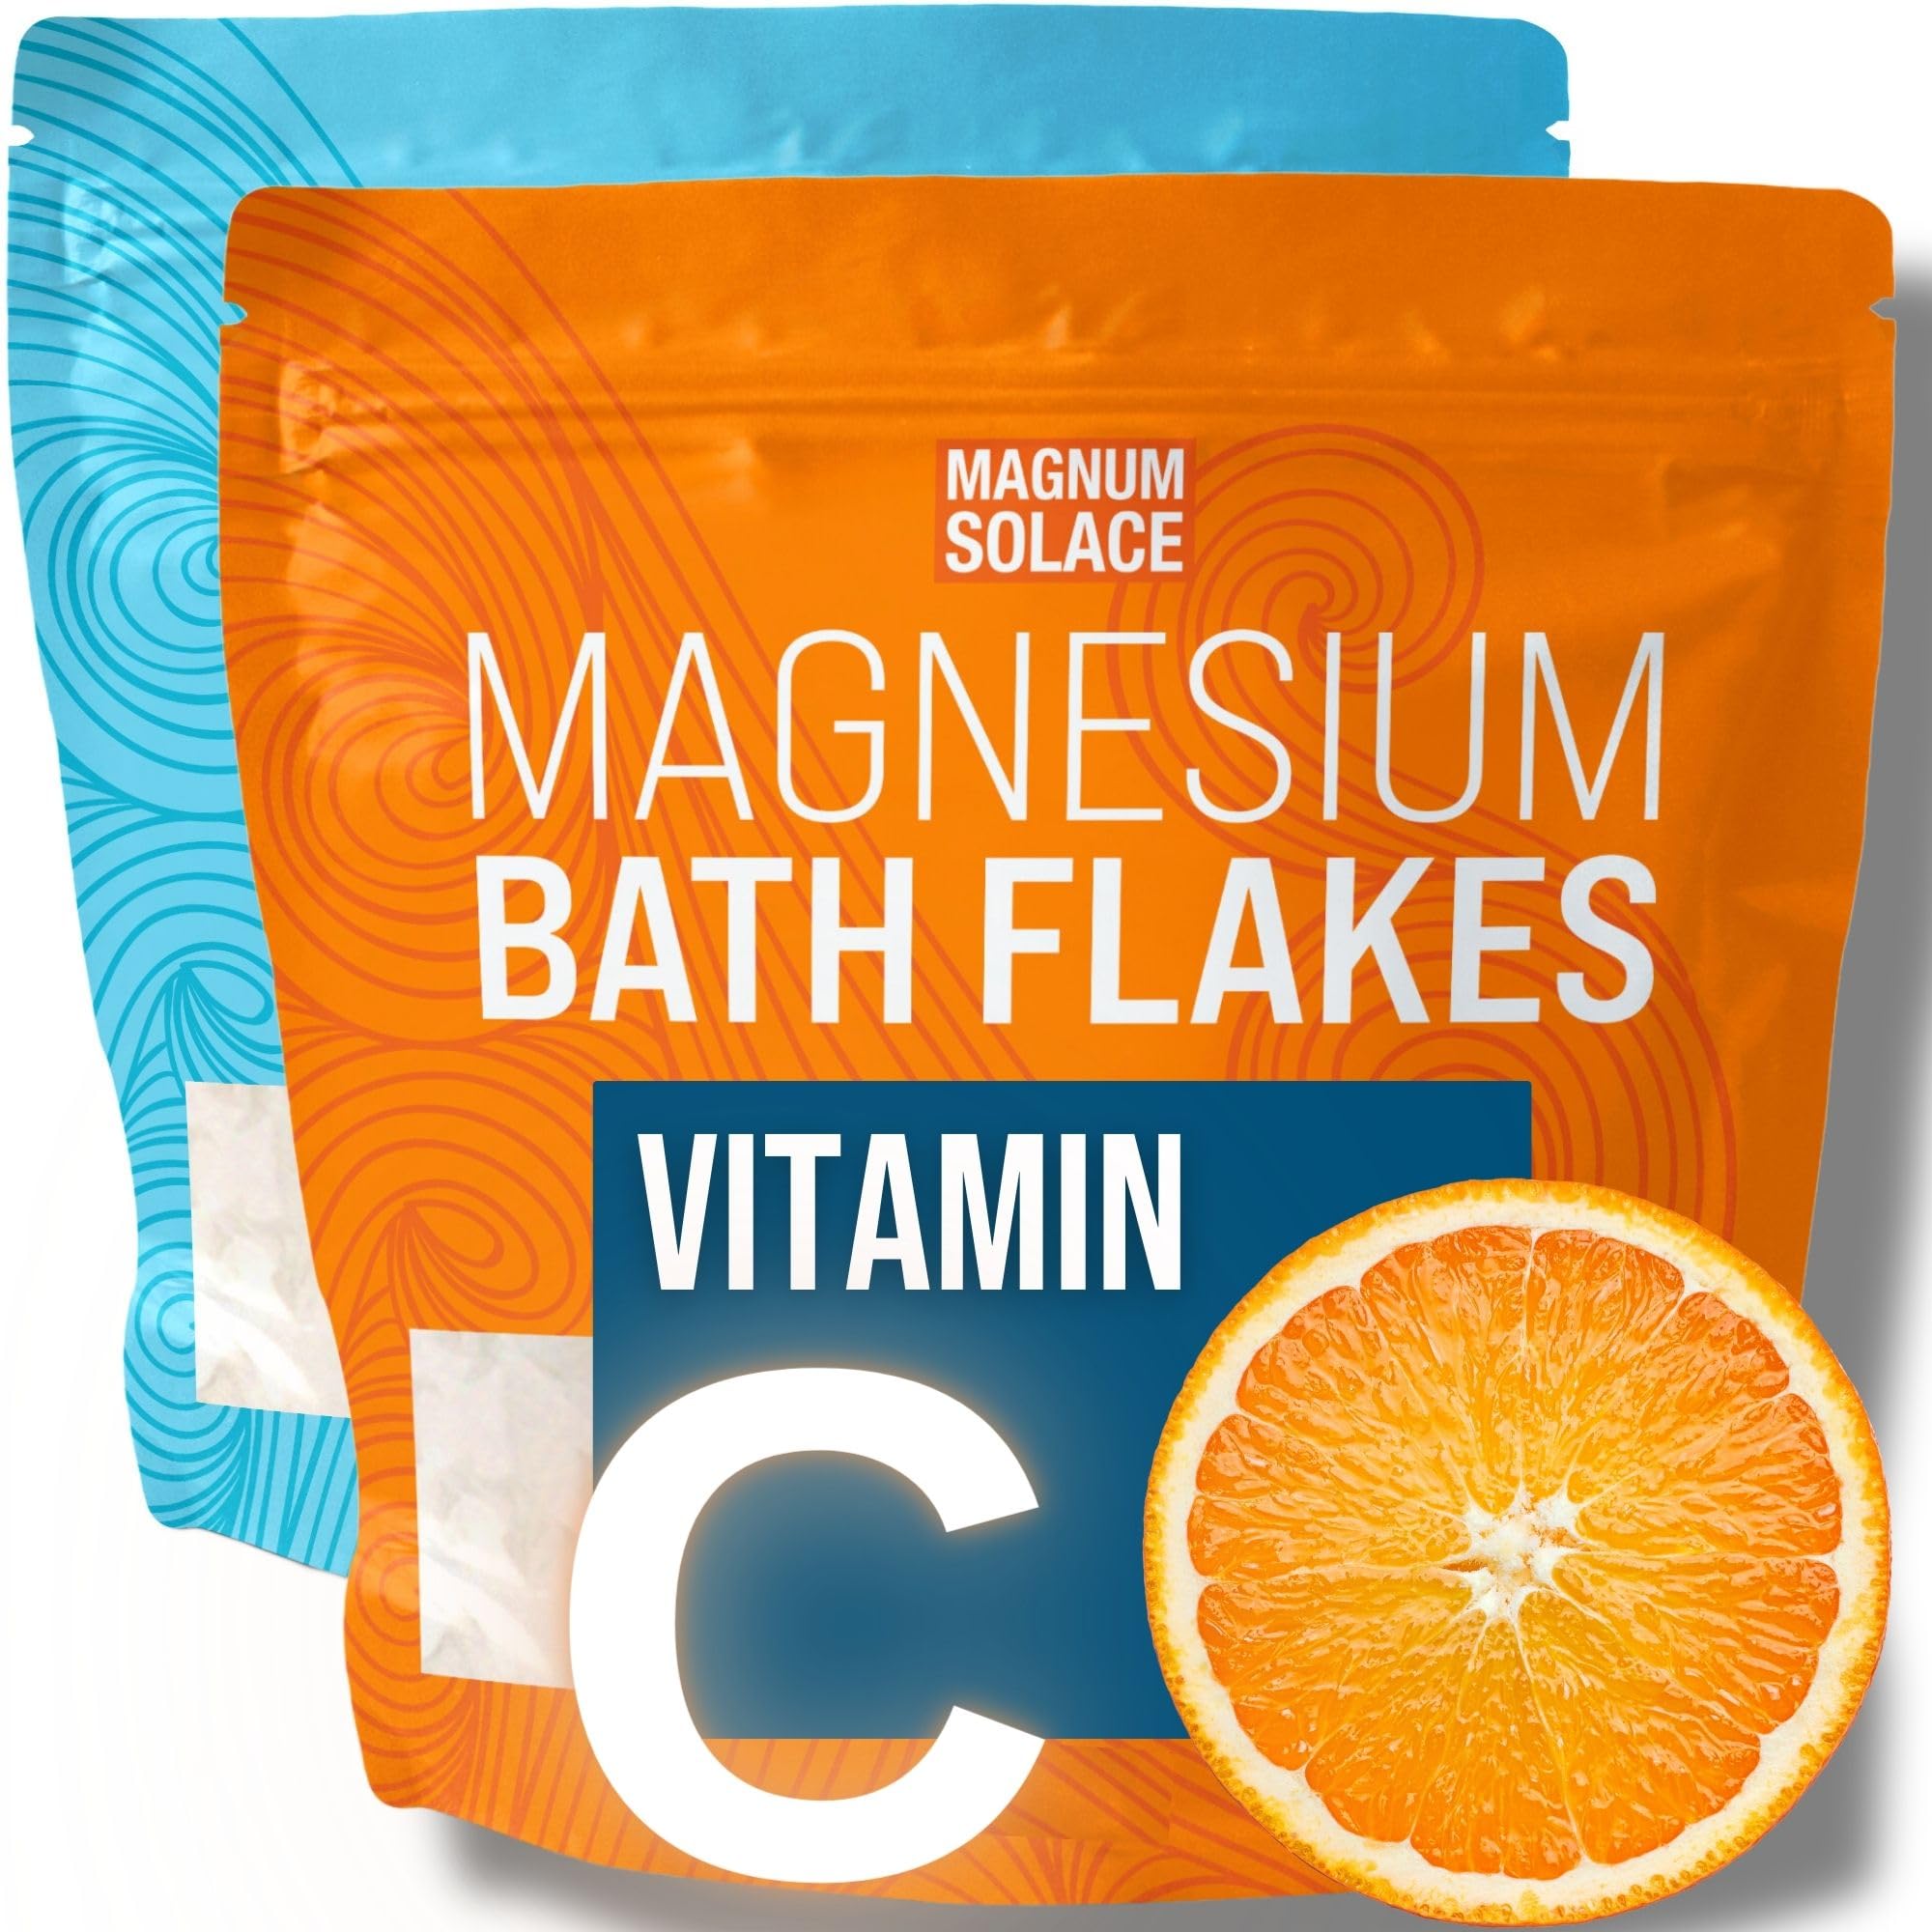 Magnesium Flakes Enriched with Vitamin C Crystals, 10 LBS and Unscented Magnesium Chloride Flakes: 2 Pack Bundle